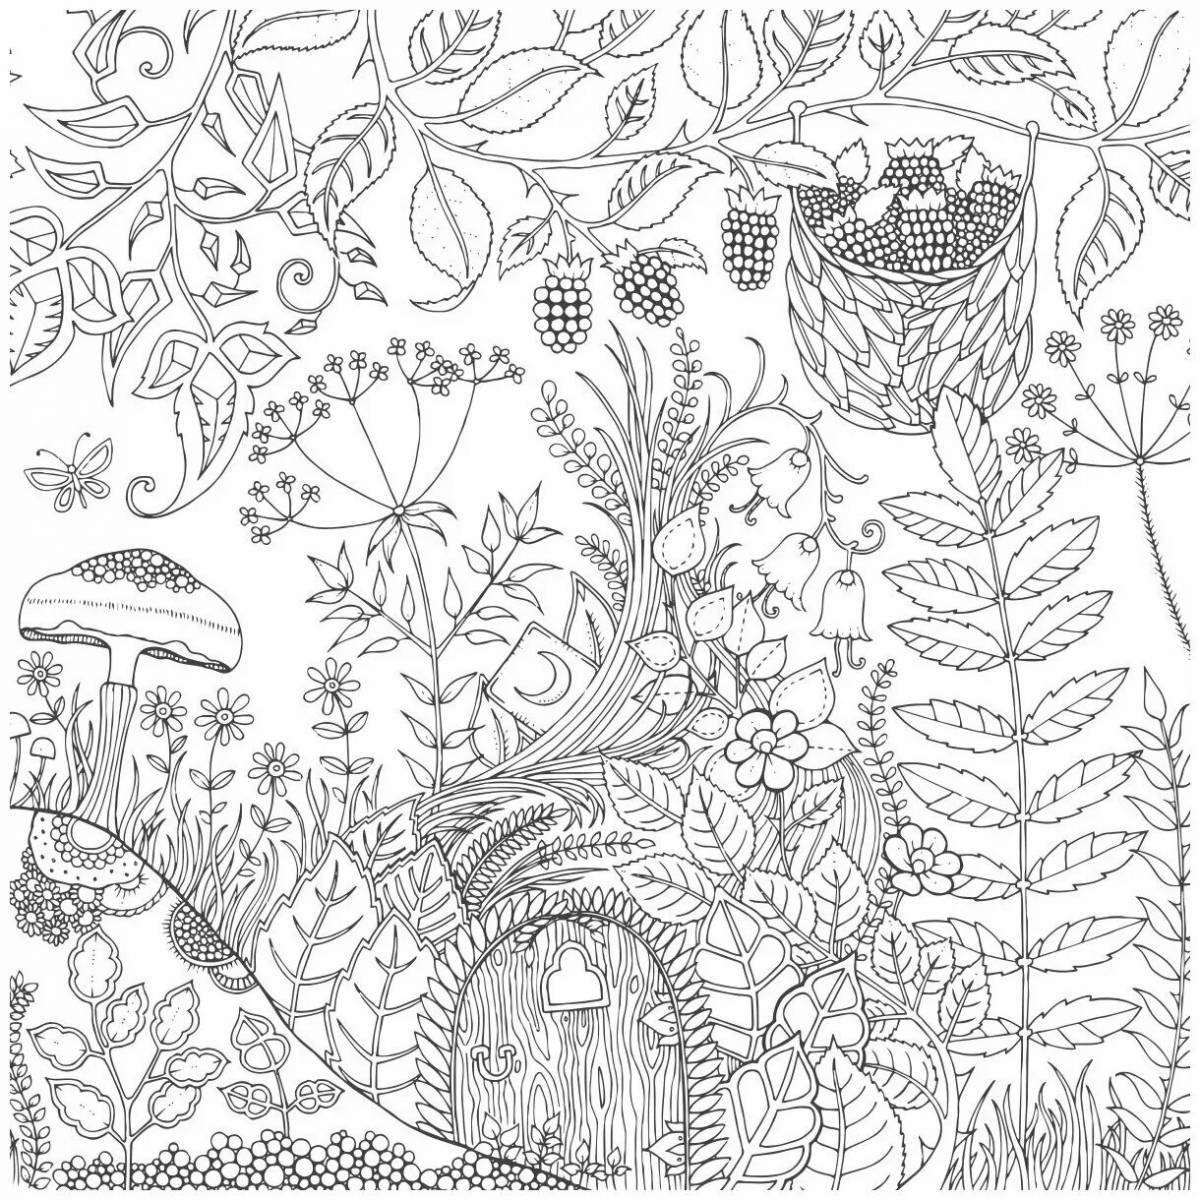 Amazing jungle coloring page - thrilling